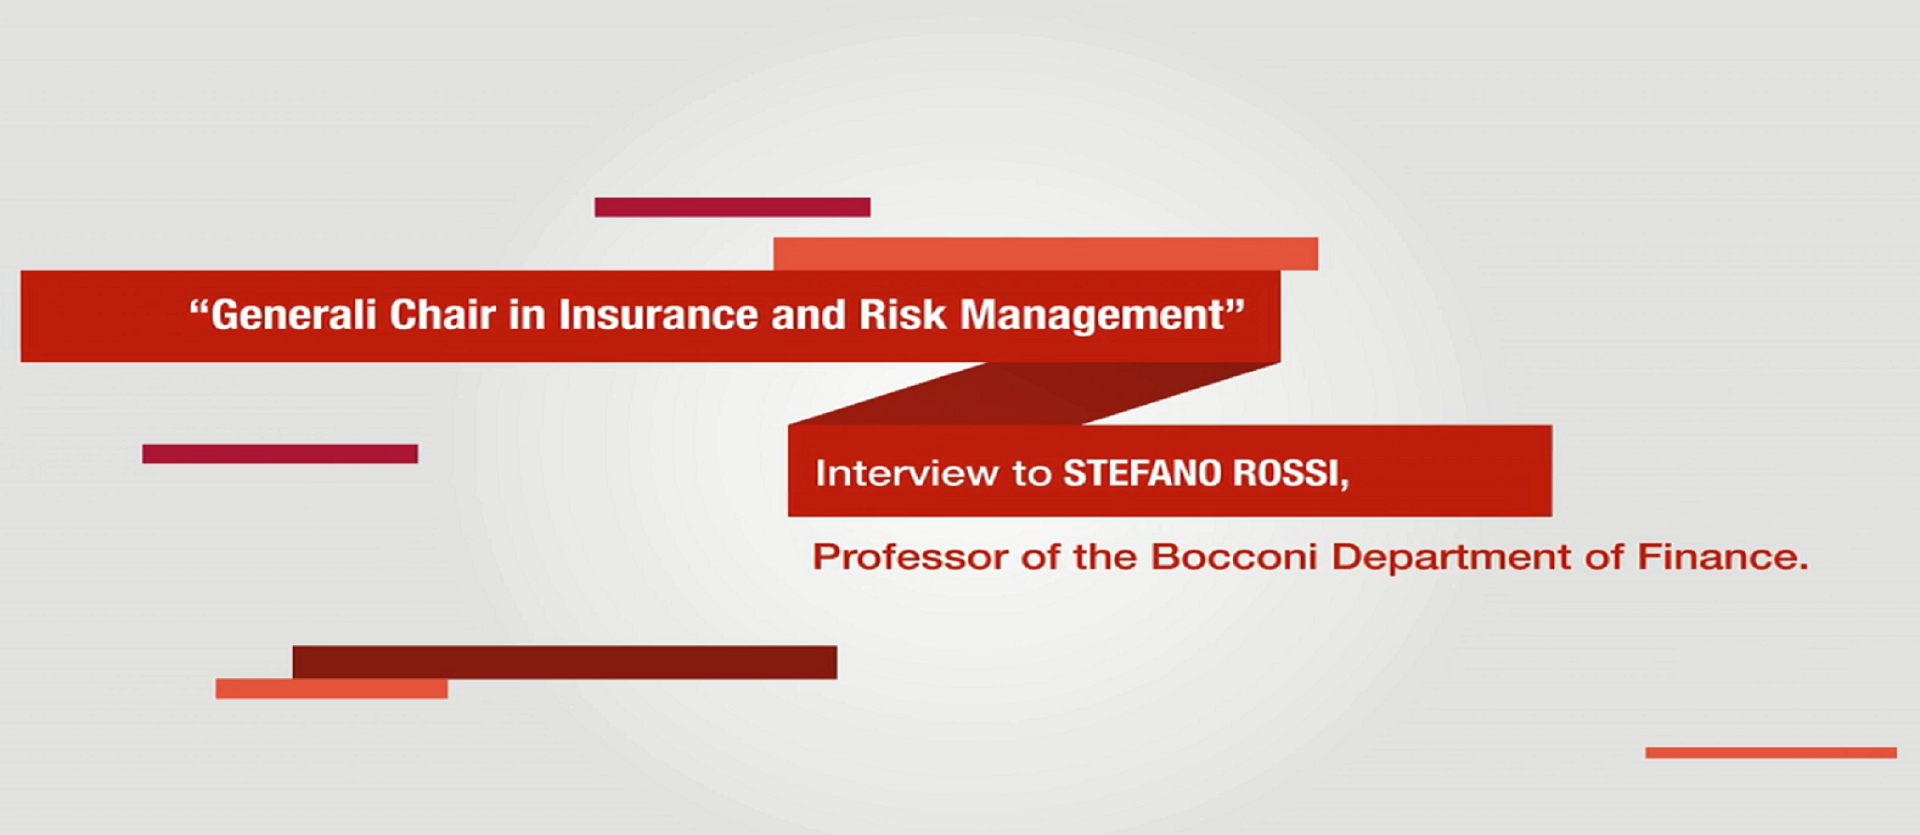 Interview to Stefano Rossi, Professor of the Bocconi Department of Finance